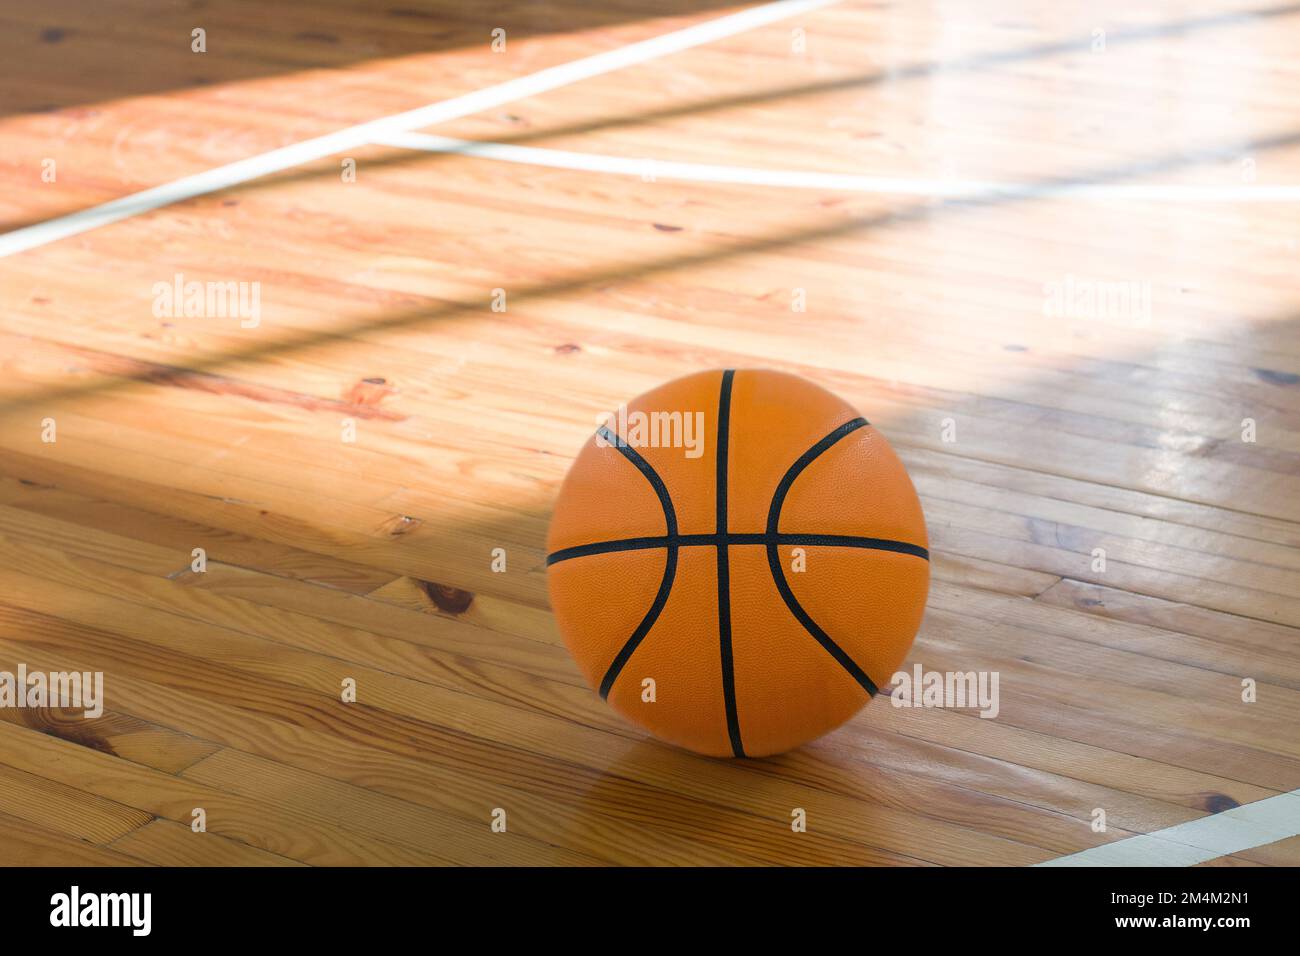 Basketball ball over floor in the gym Stock Photo